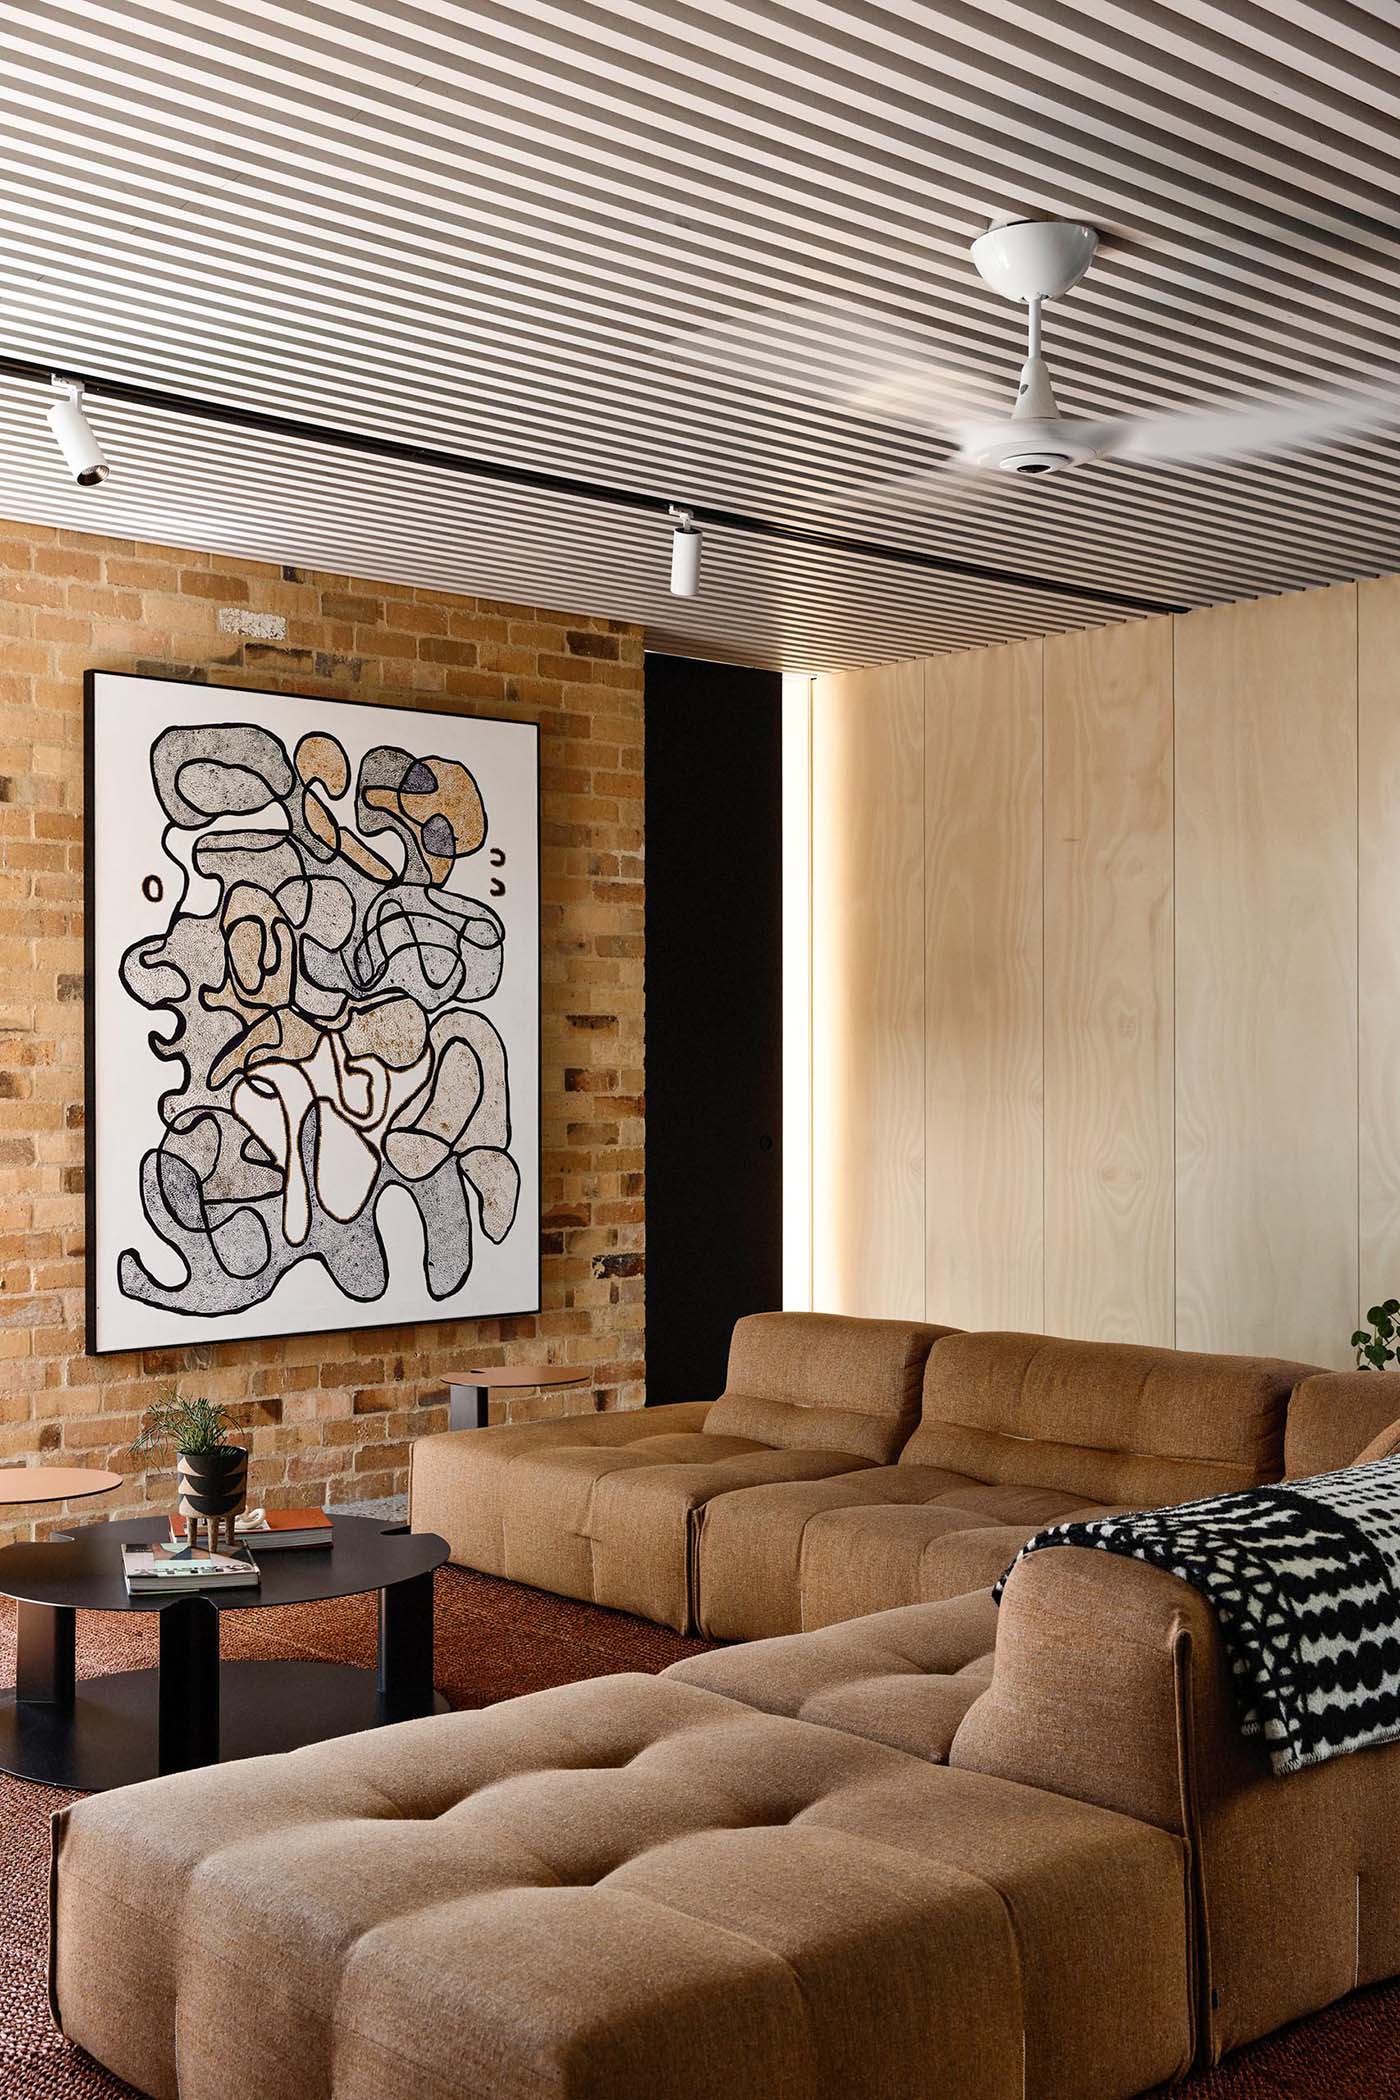 Inside this modern home, the living room is furnished with a large sofa and abstract artwork, while a white slat ceiling adds a unique design element.